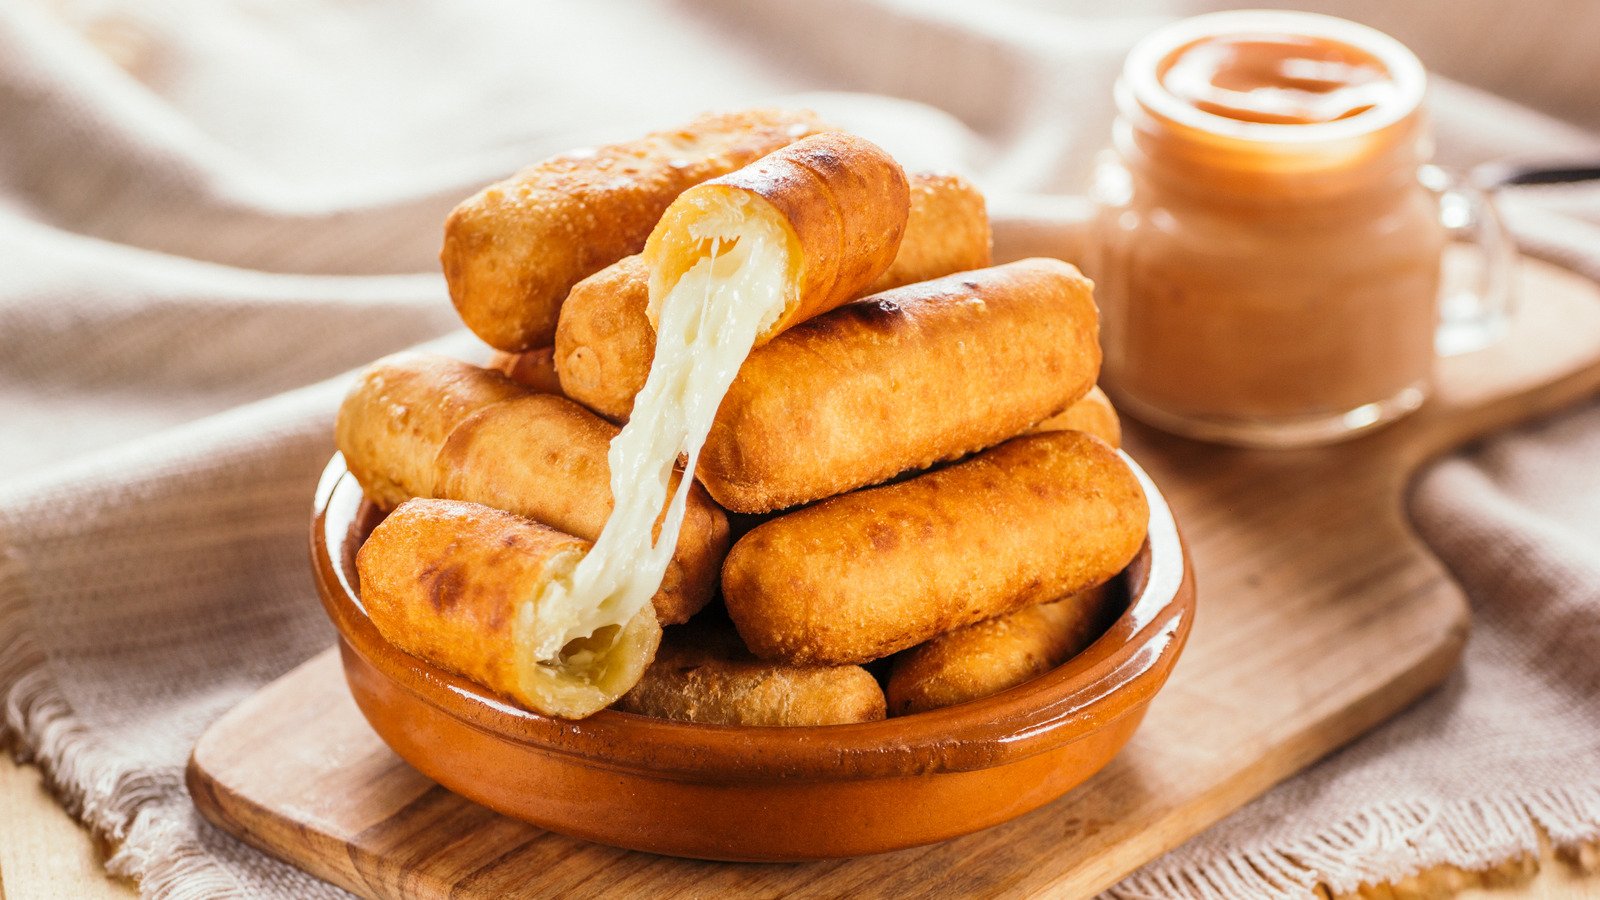 The Venezuelan Cheese Stick You Won't Want To Put Down - Mashed